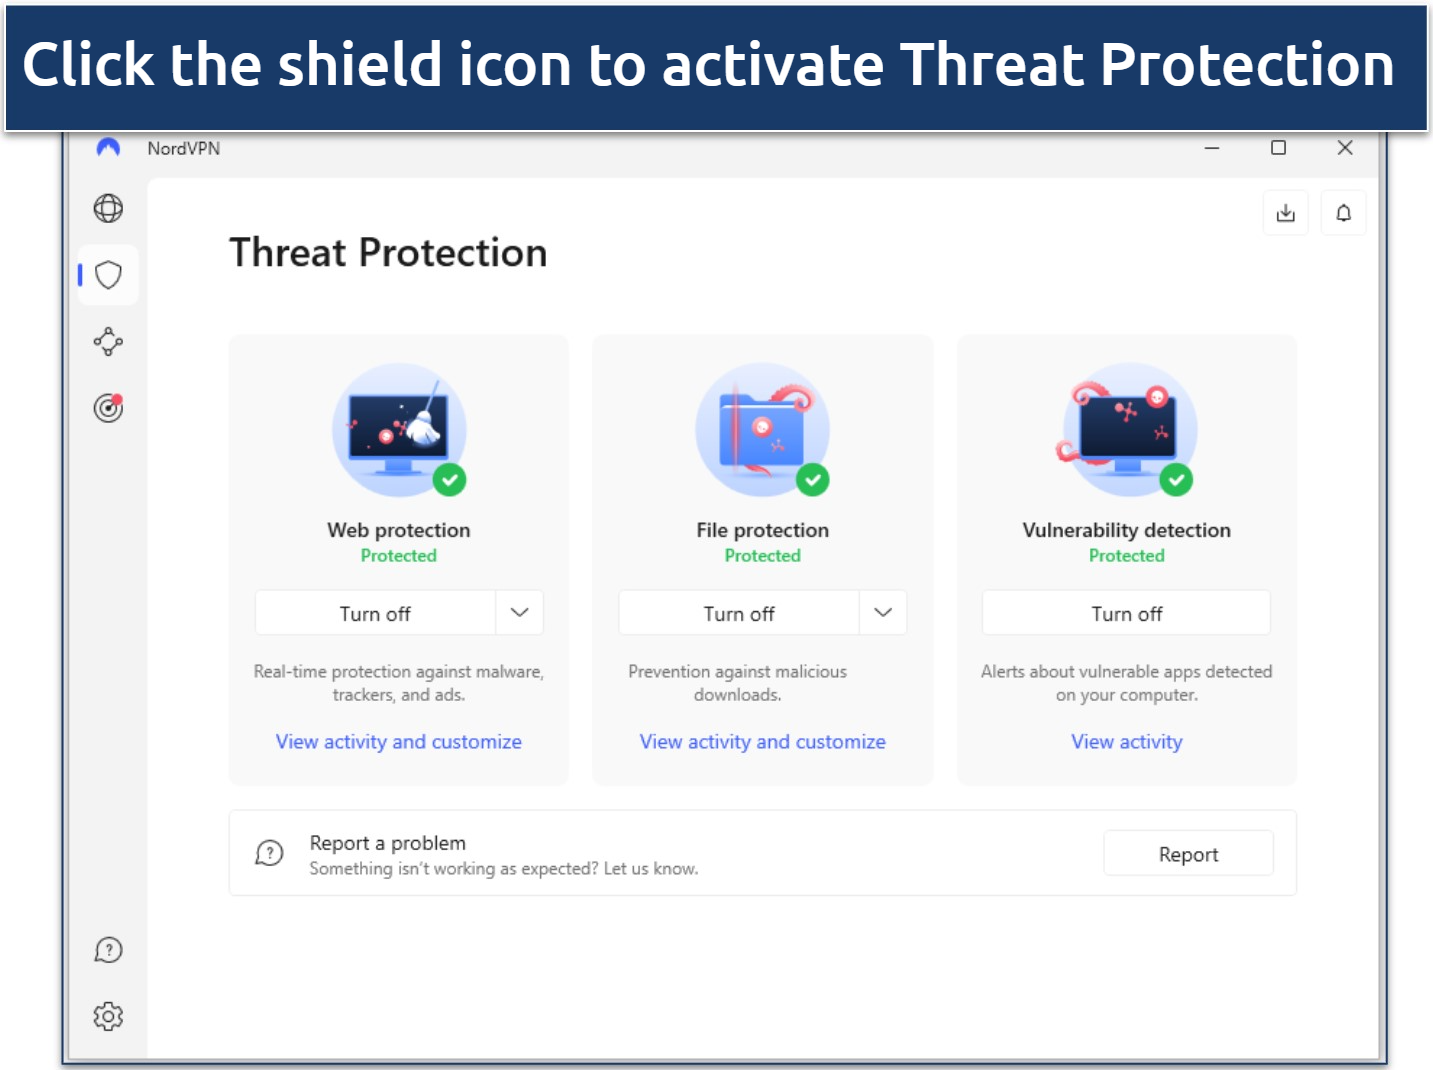 Screenshot of the NordVPN app showing the different safeguards Threat Protection offers